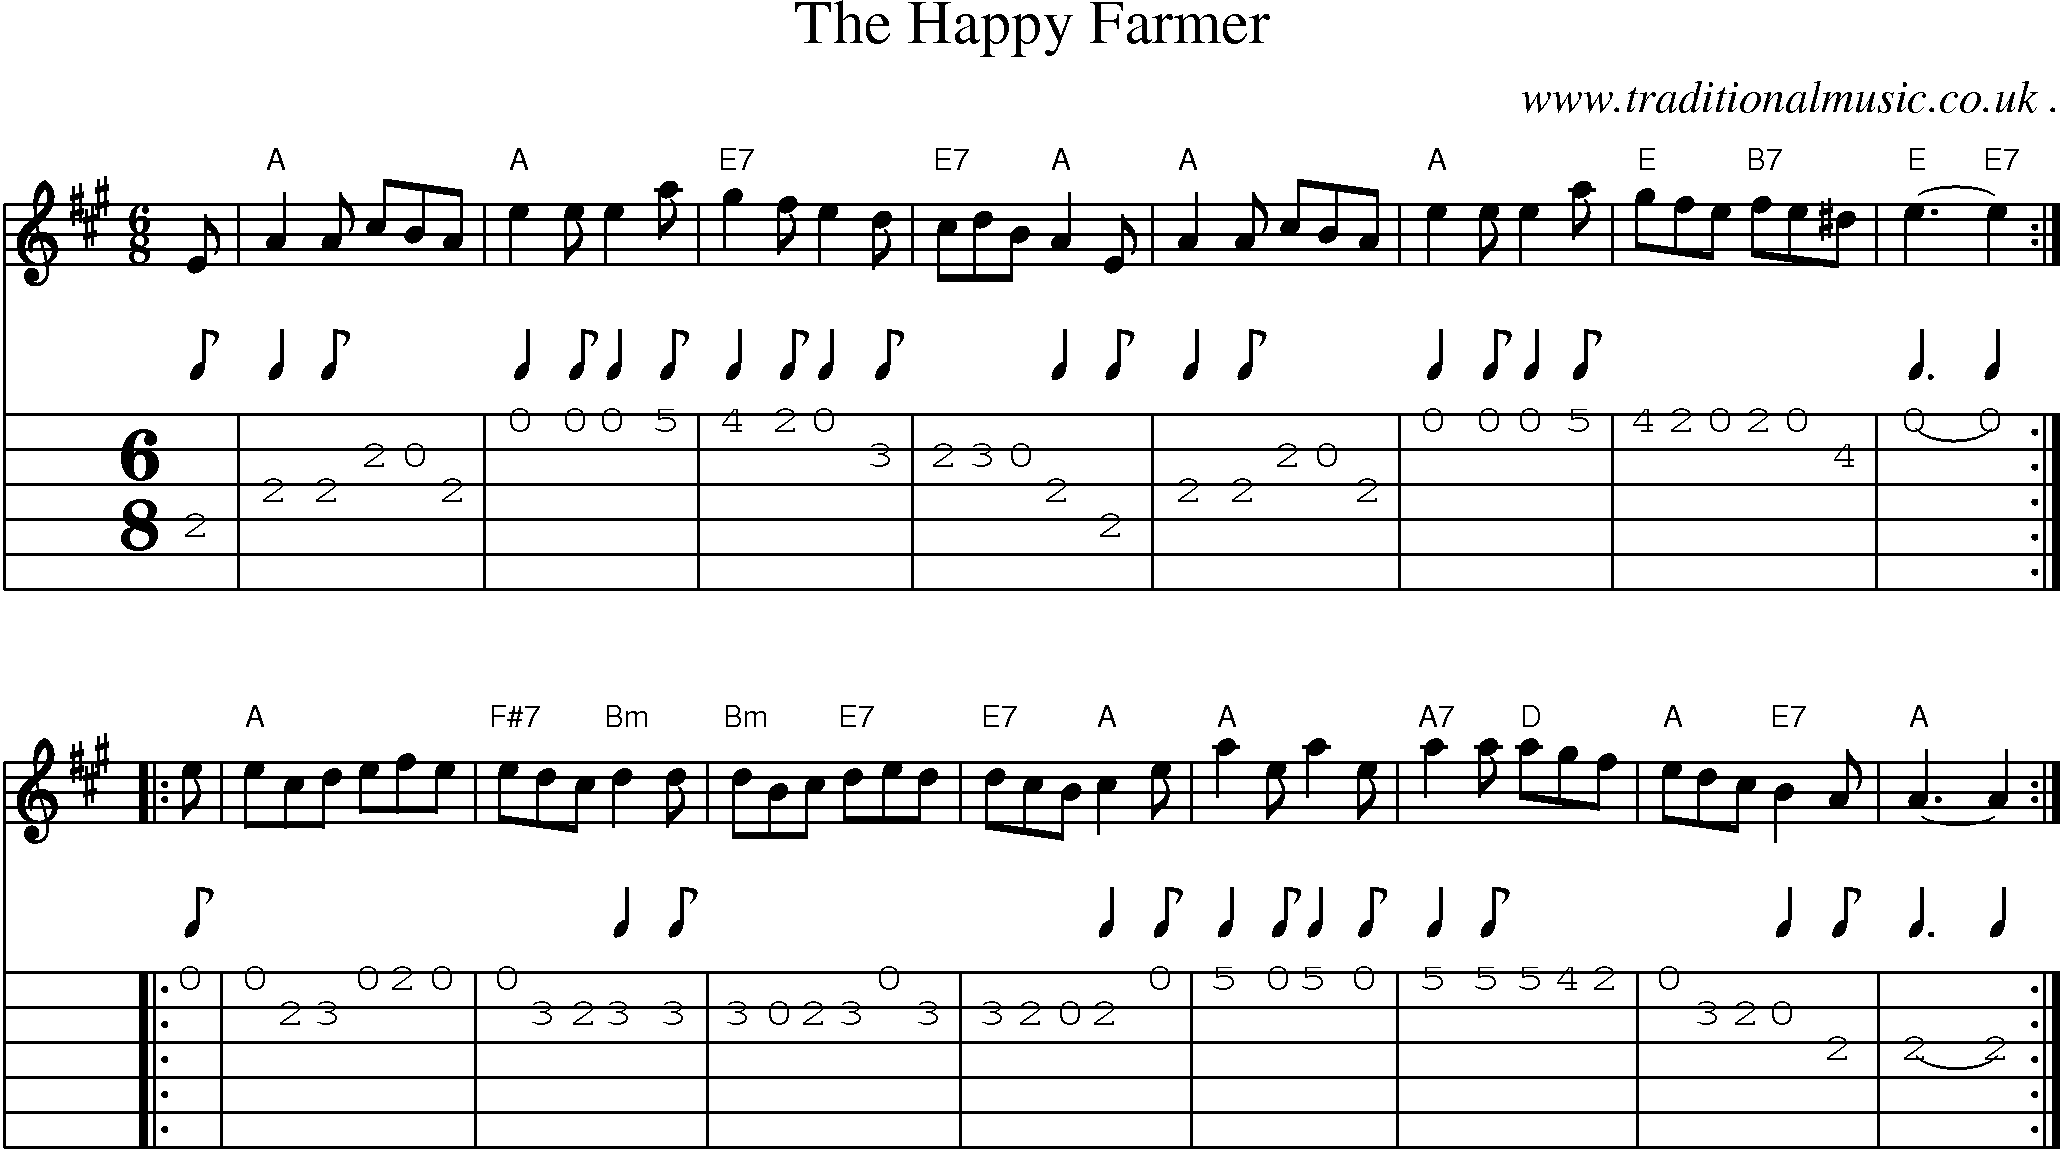 Sheet-music  score, Chords and Guitar Tabs for The Happy Farmer